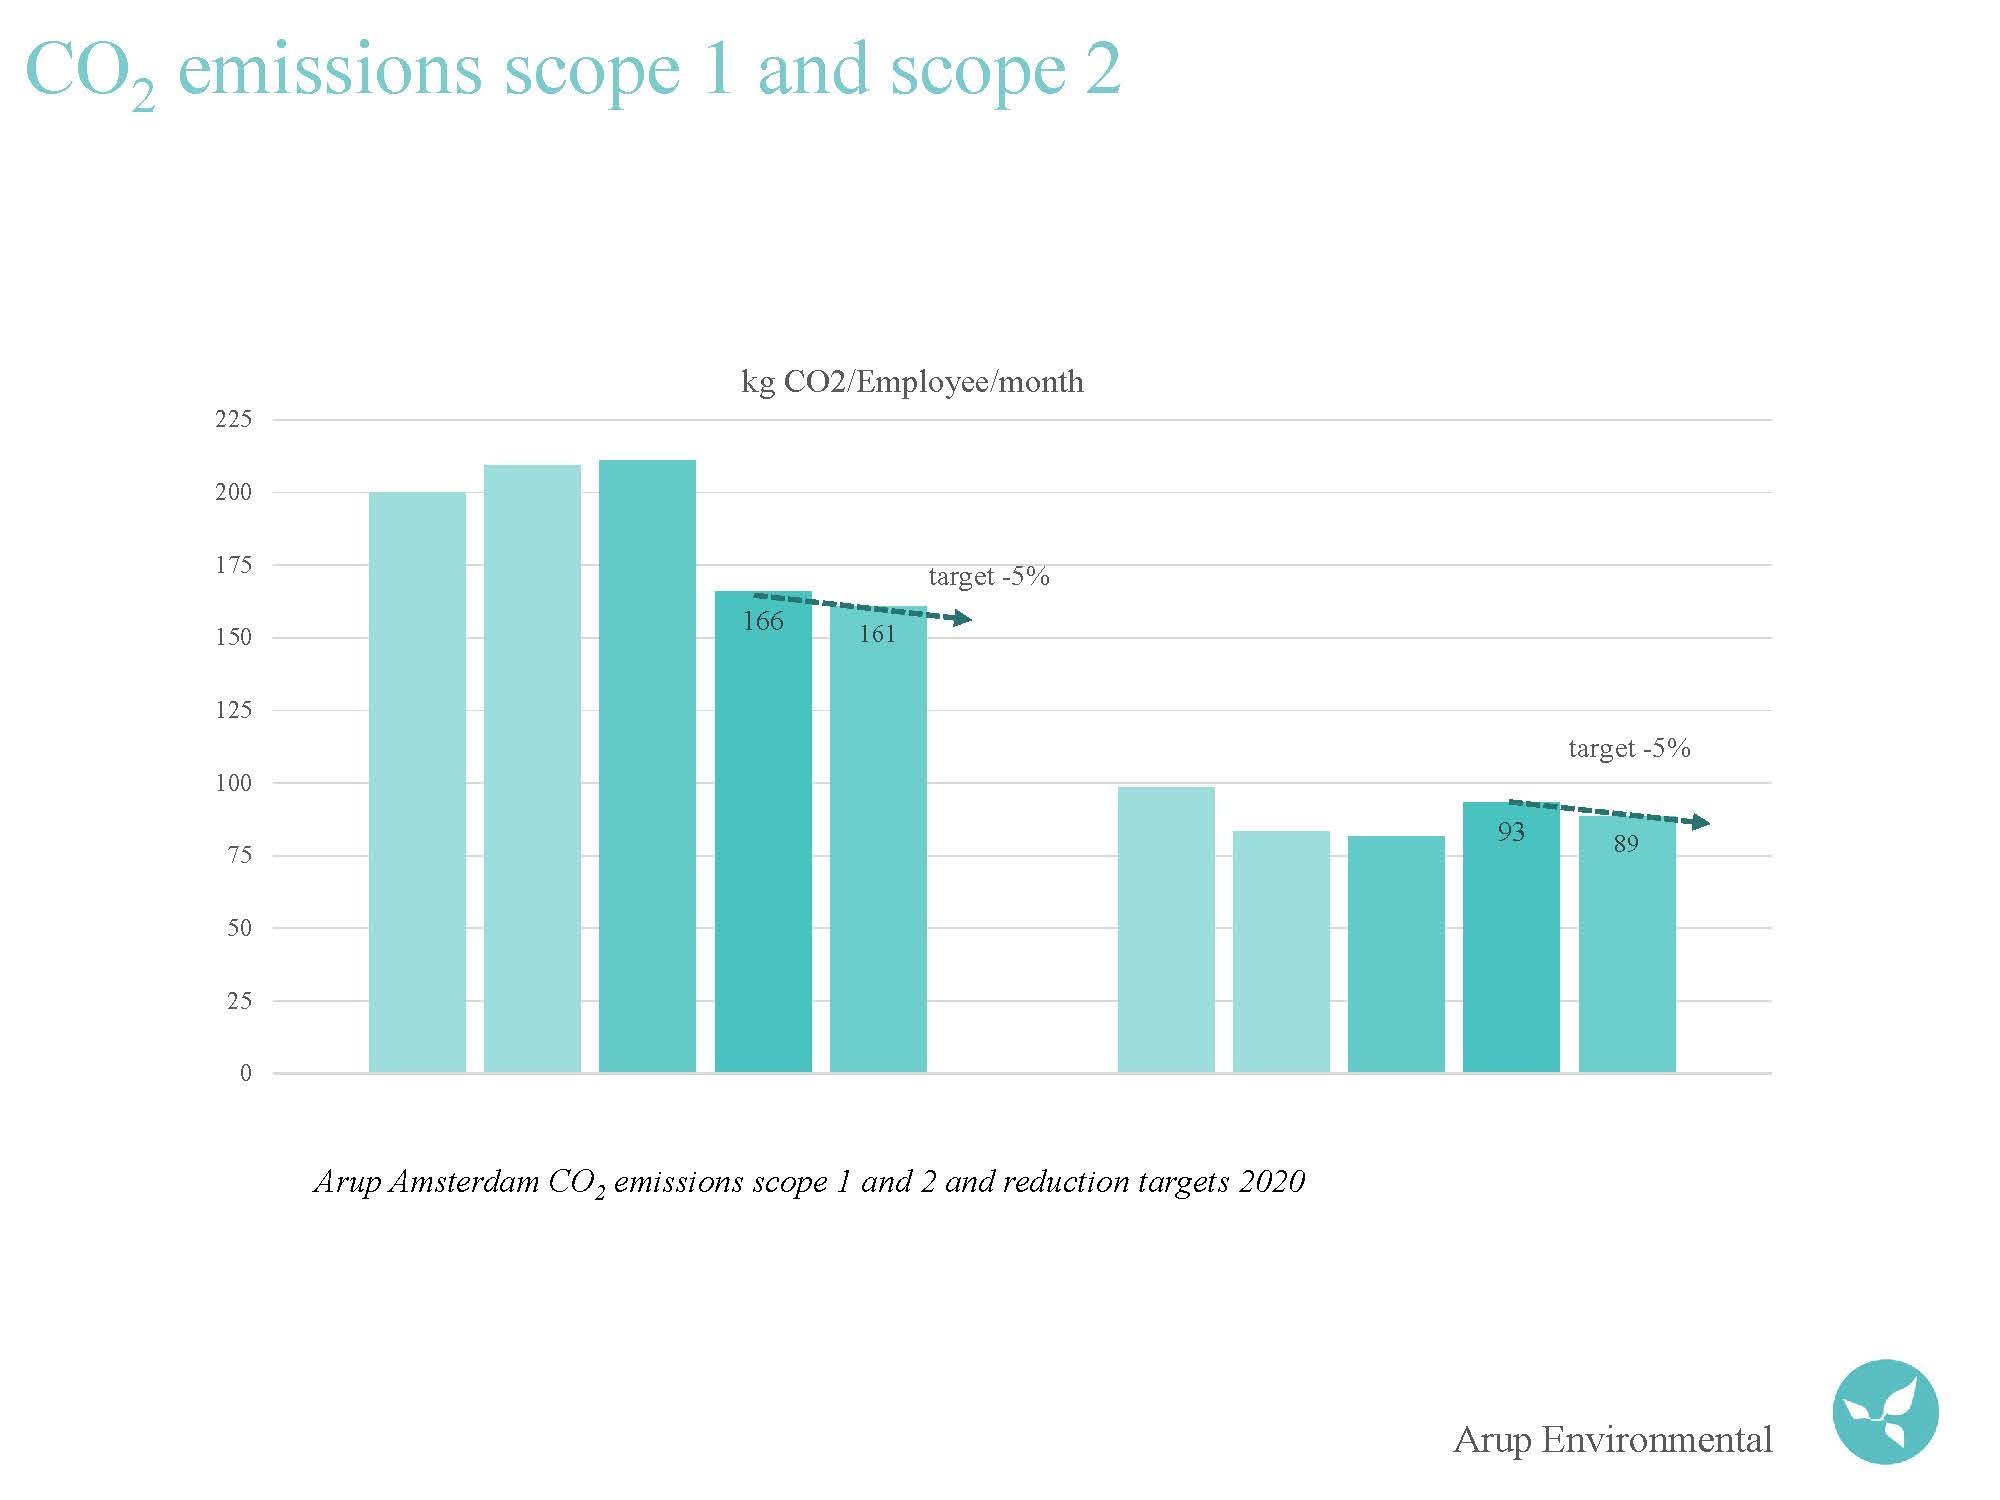 Arup Amsterdam CO2 emissions scope 1 and 2 and reduction targets 2020